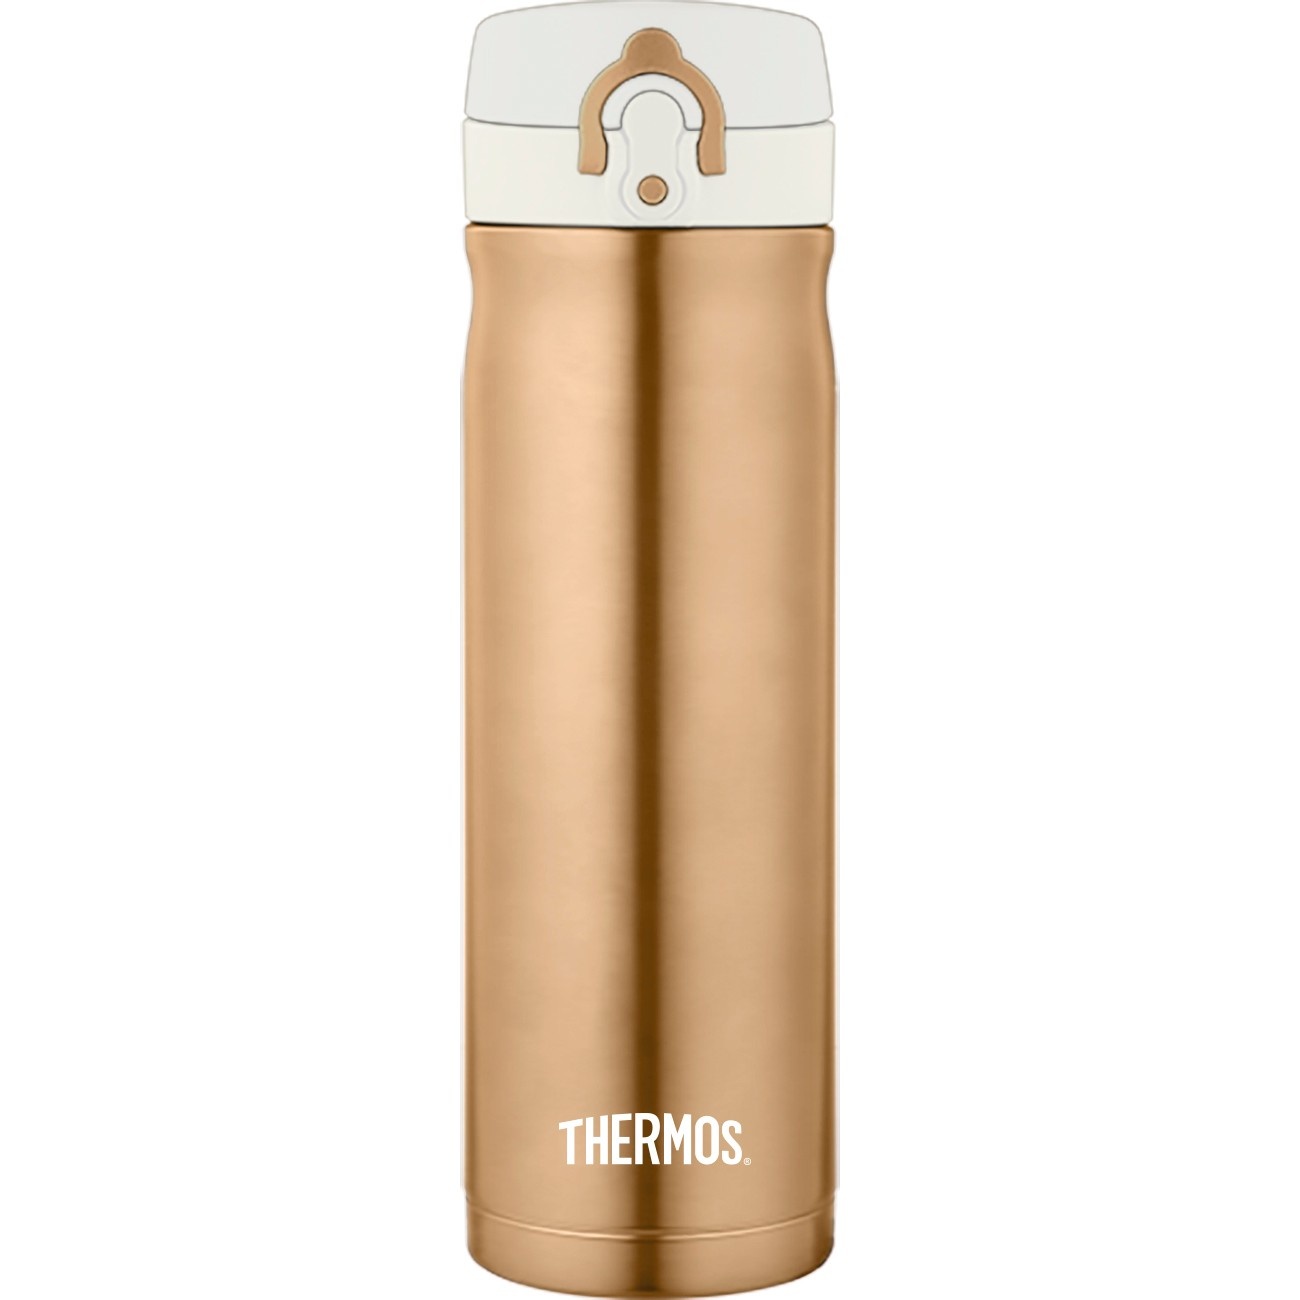 Thermos 16 oz. Vacuum Insulated Stainless Steel Direct Drink Bottle